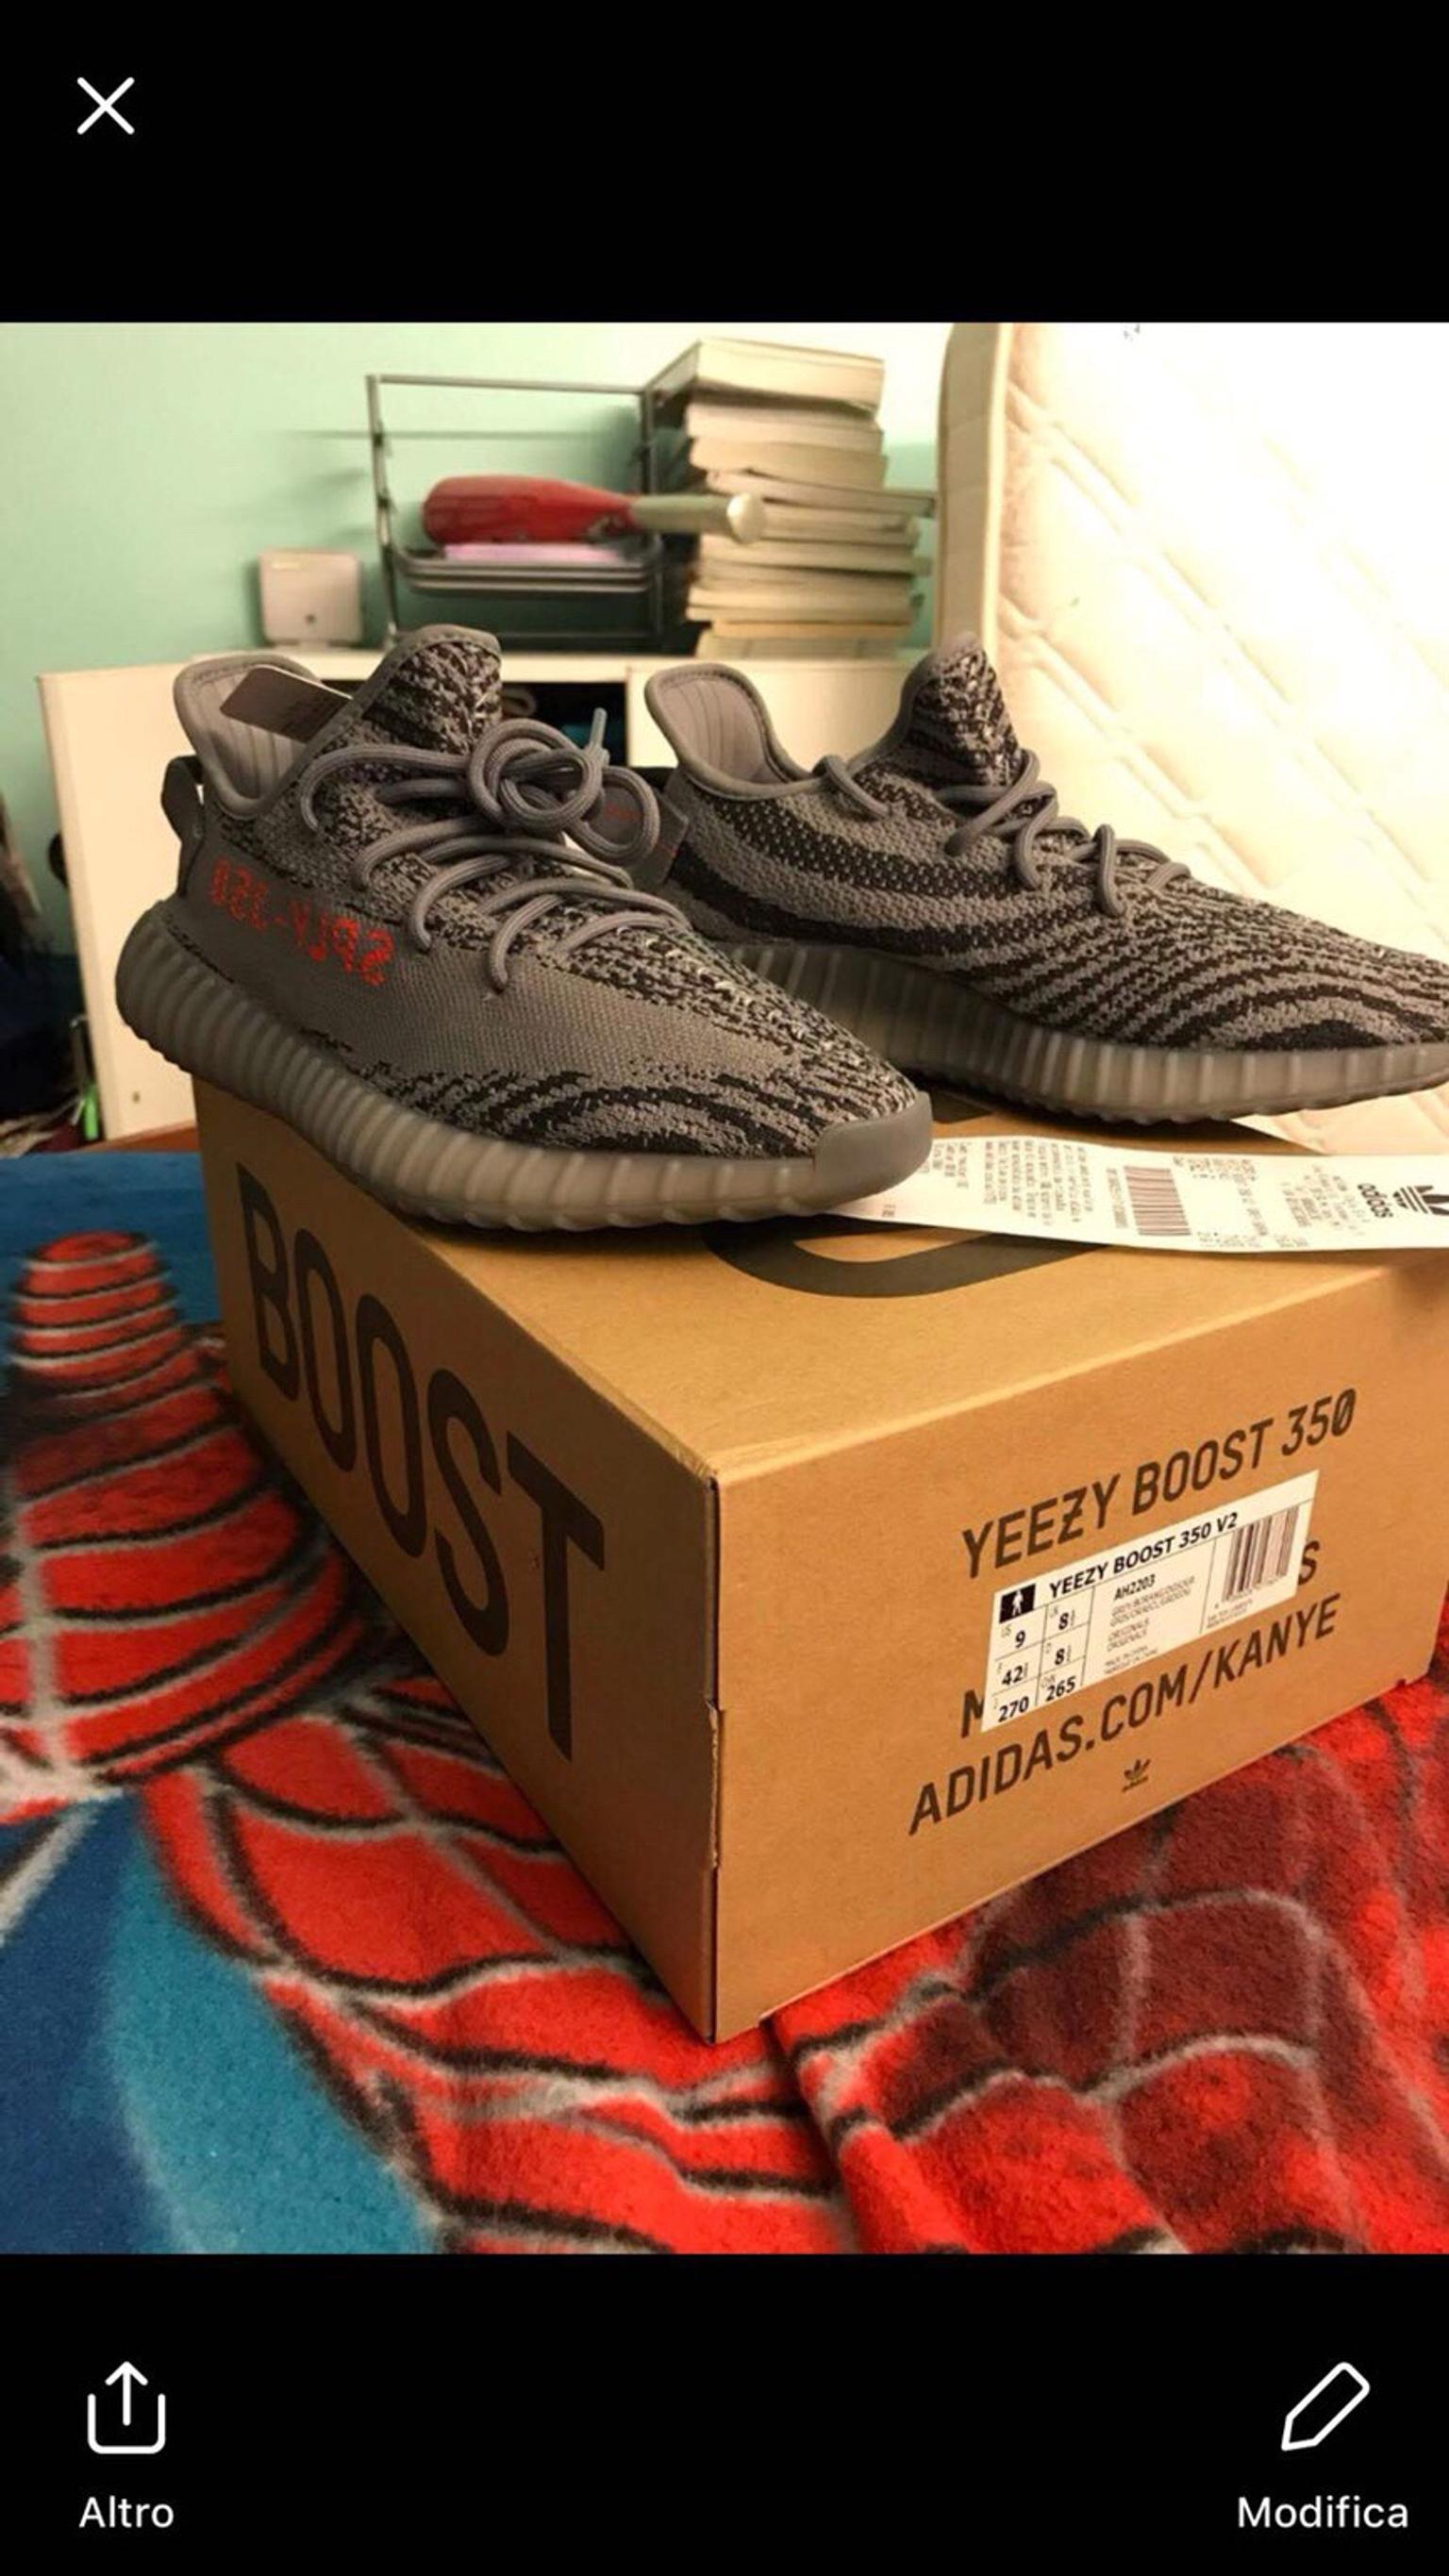 Adidas Yeezy Boost 350 V2 beluga 2.0 in 20152 Milano for €300.00 for sale |  Shpock